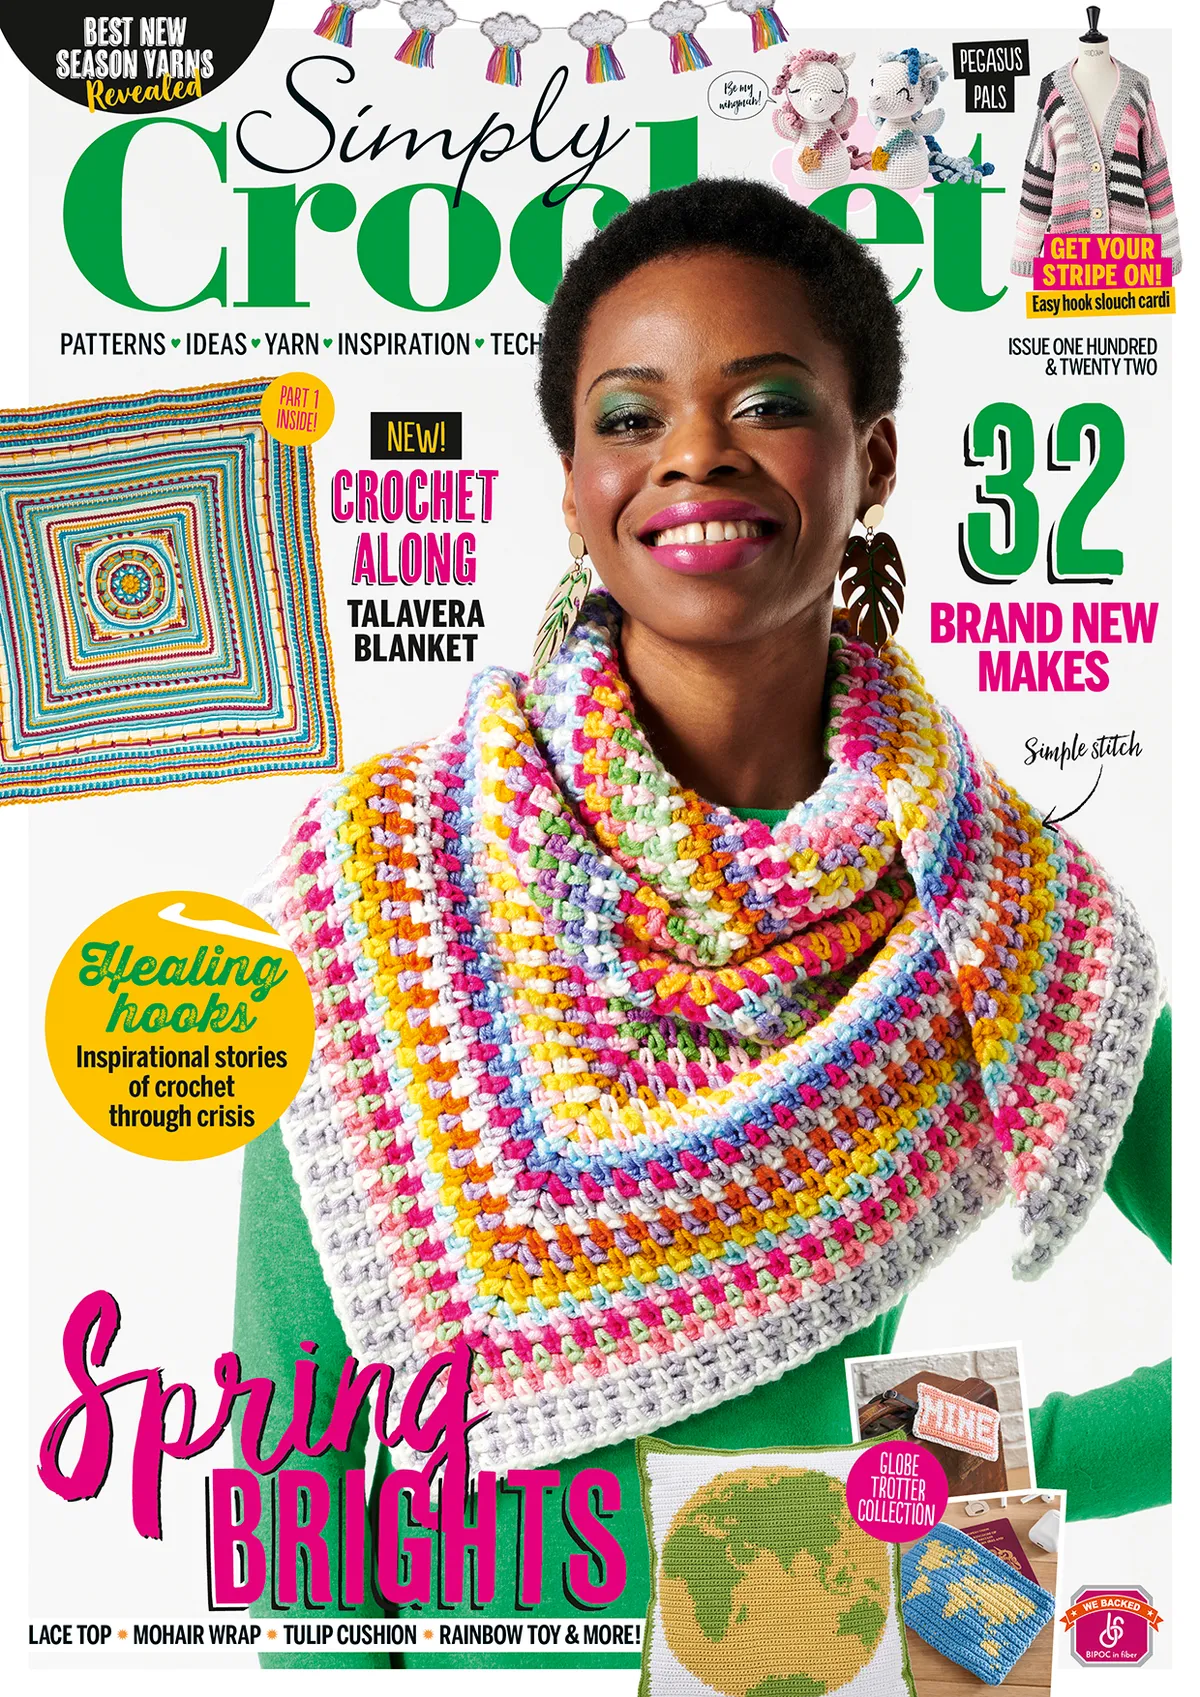 Simply Crochet issue 122